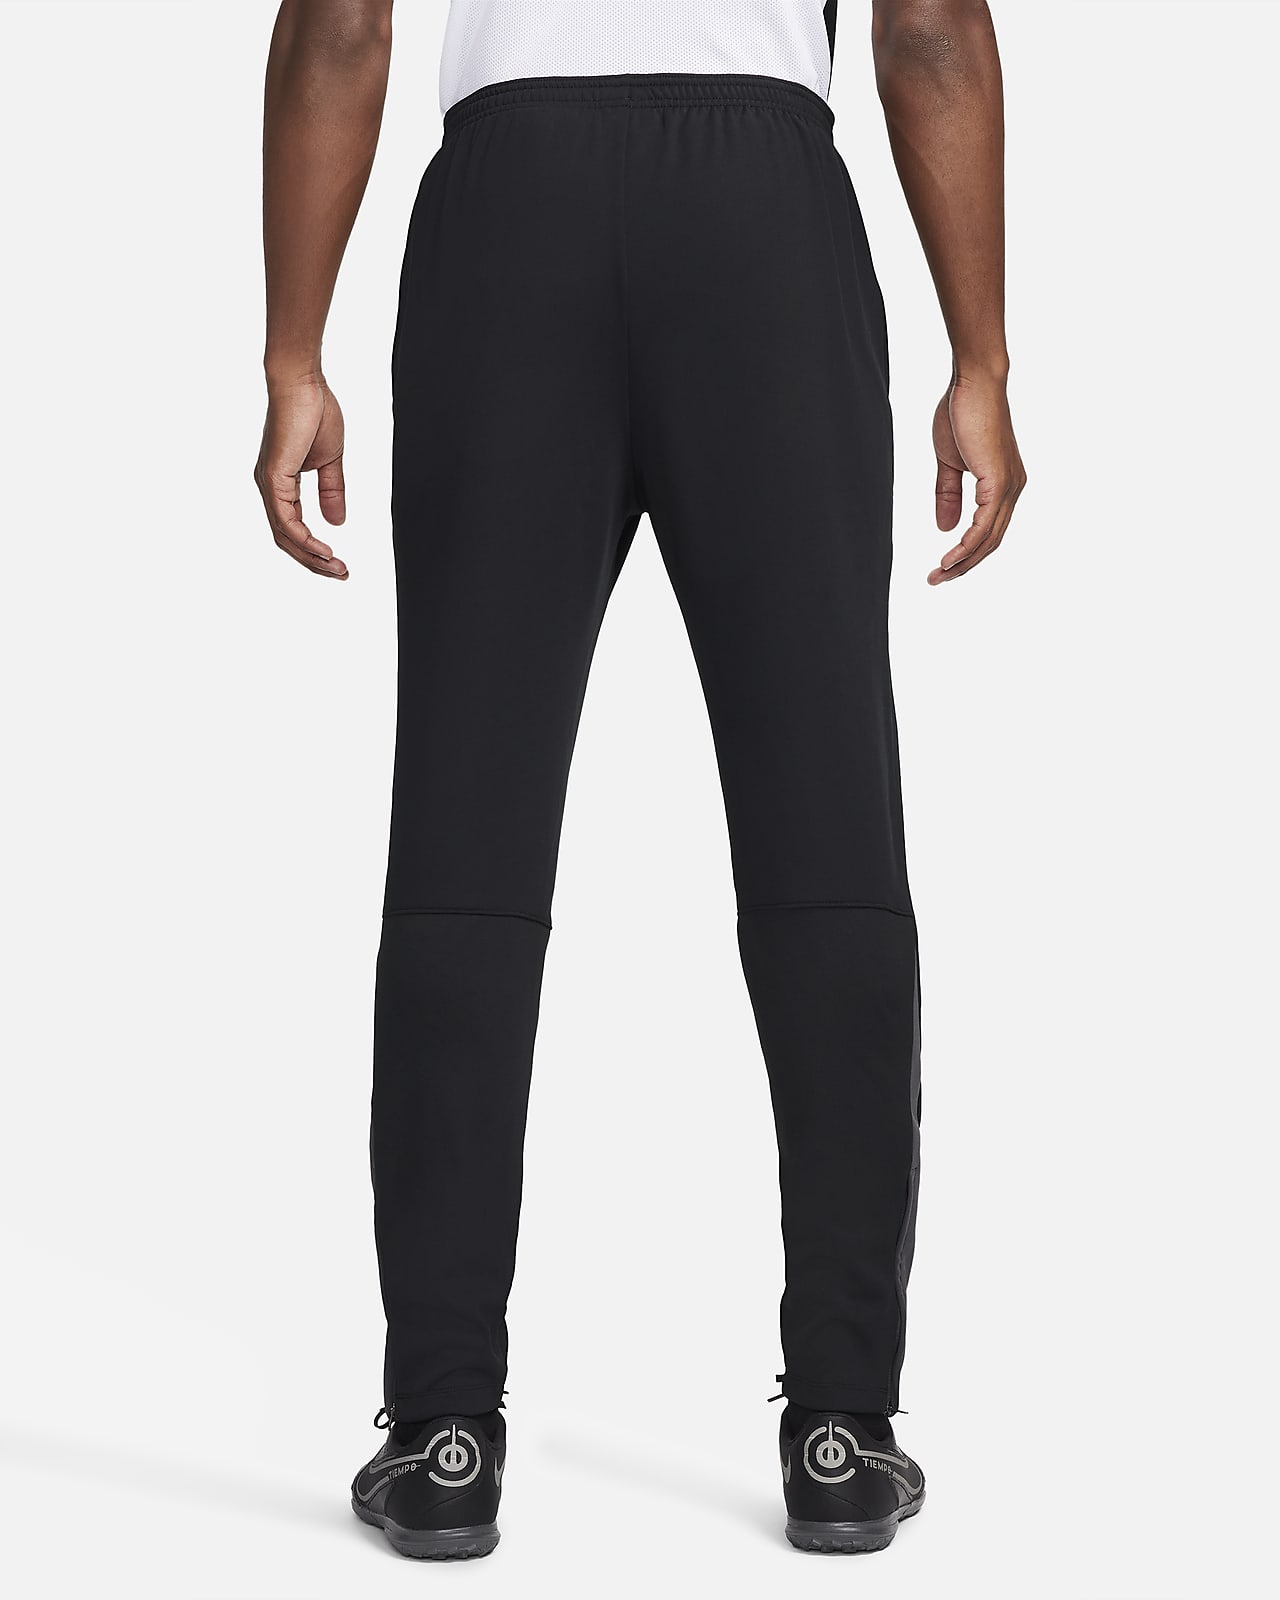 Nike, Therma-FIT Academy Men's Soccer Pants